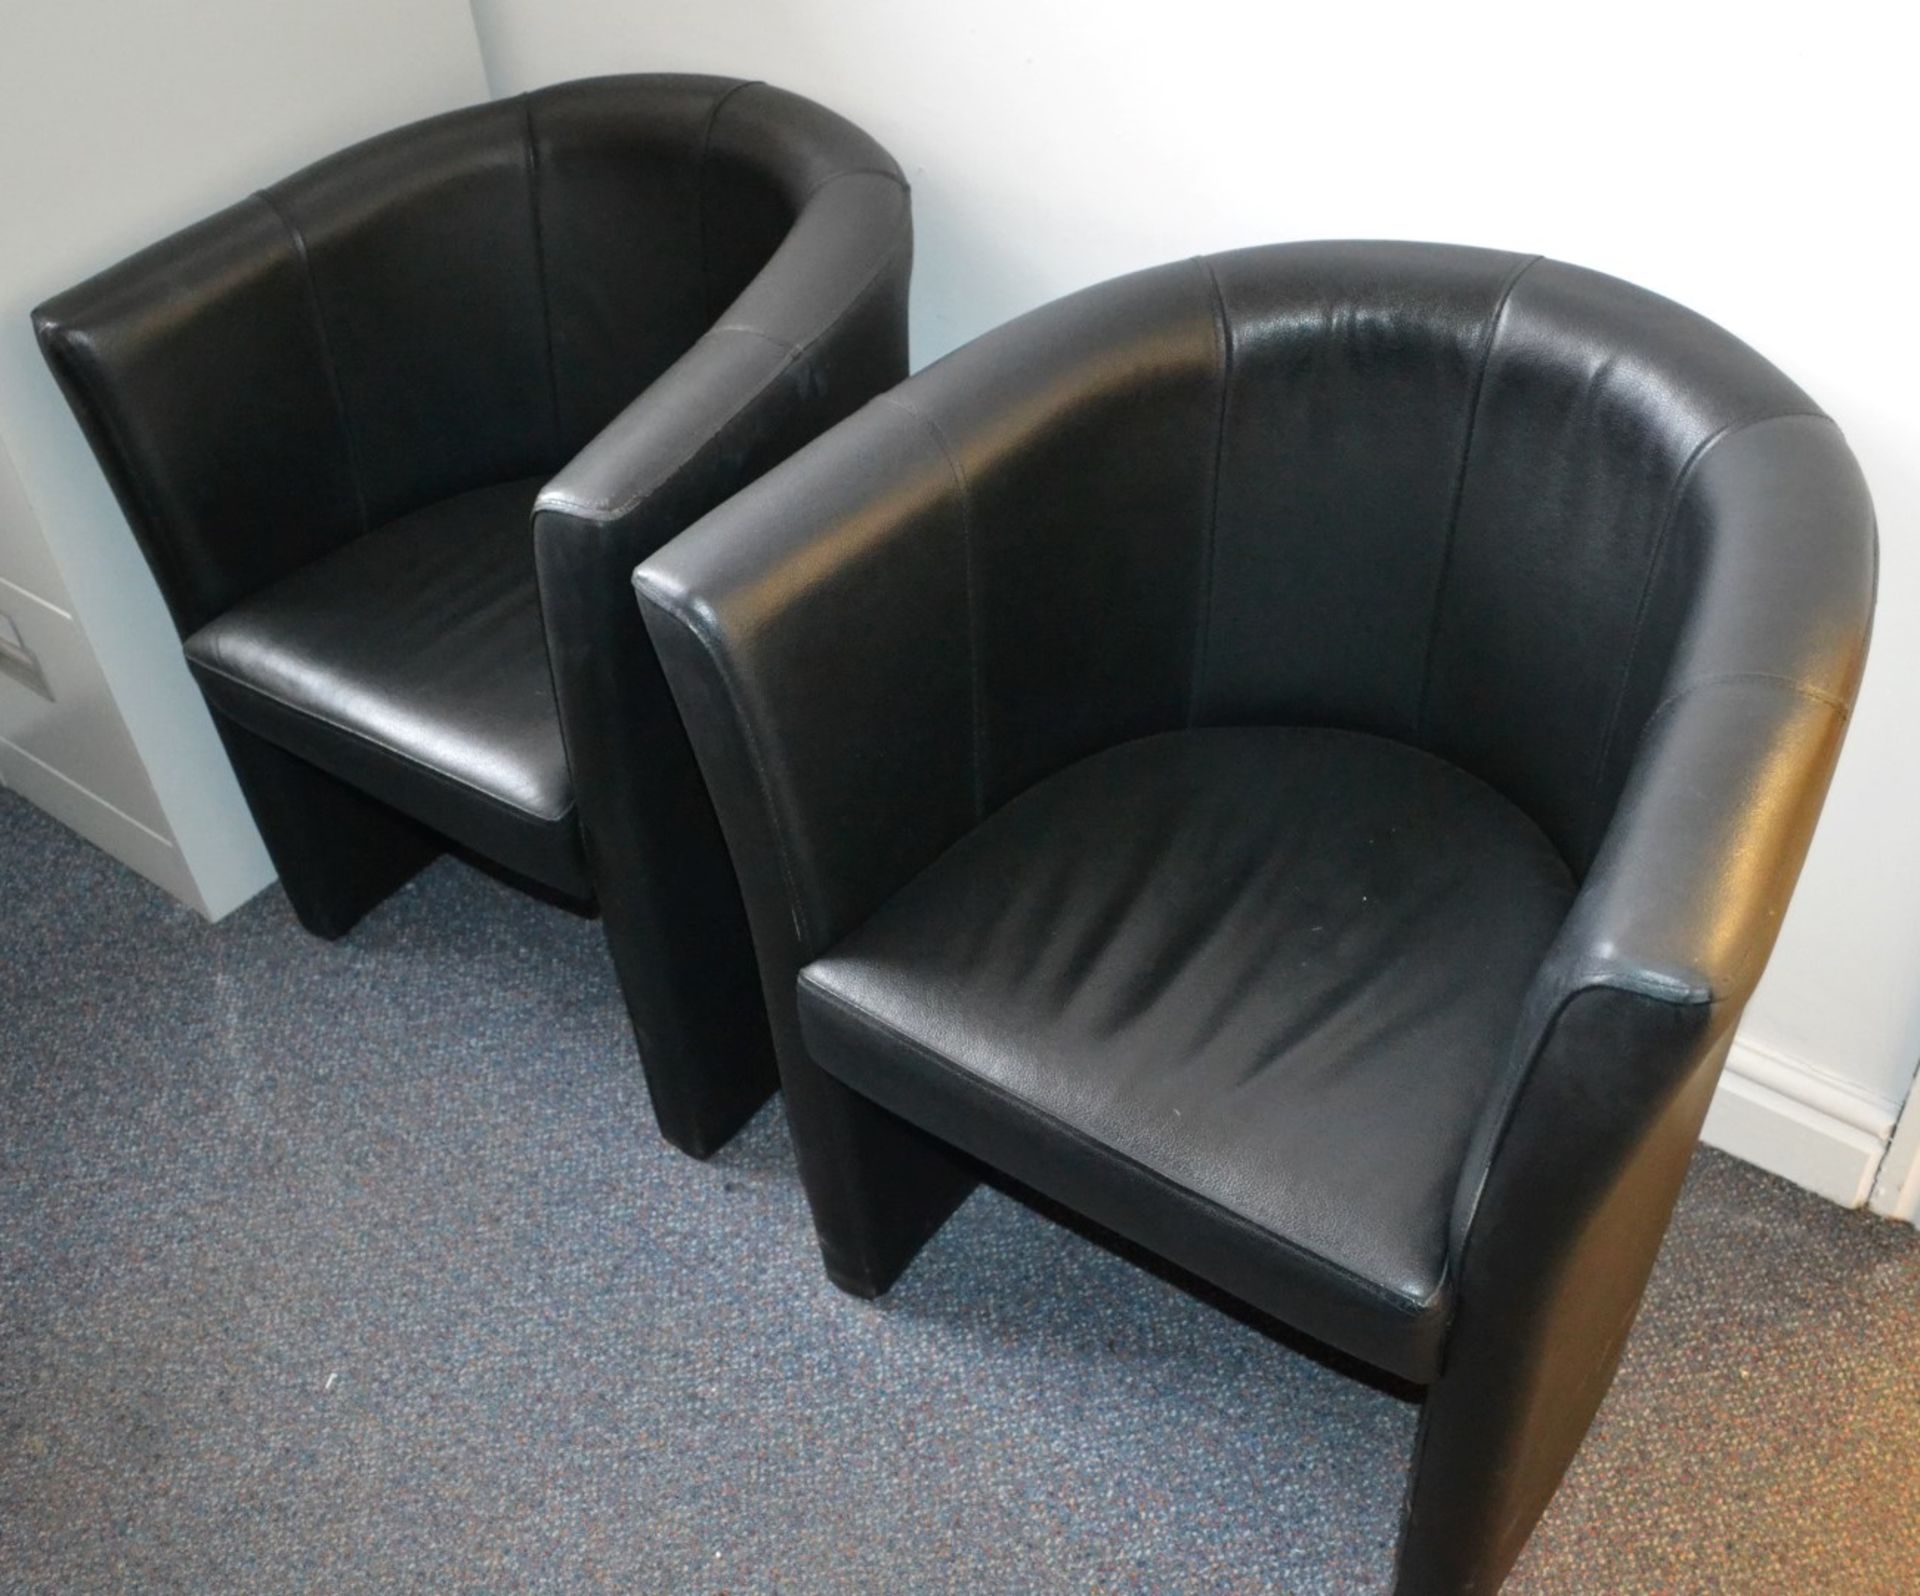 3 x Faux Leather Tub Chairs In Black - In Good Overall Condition - Ref BB1184 KS